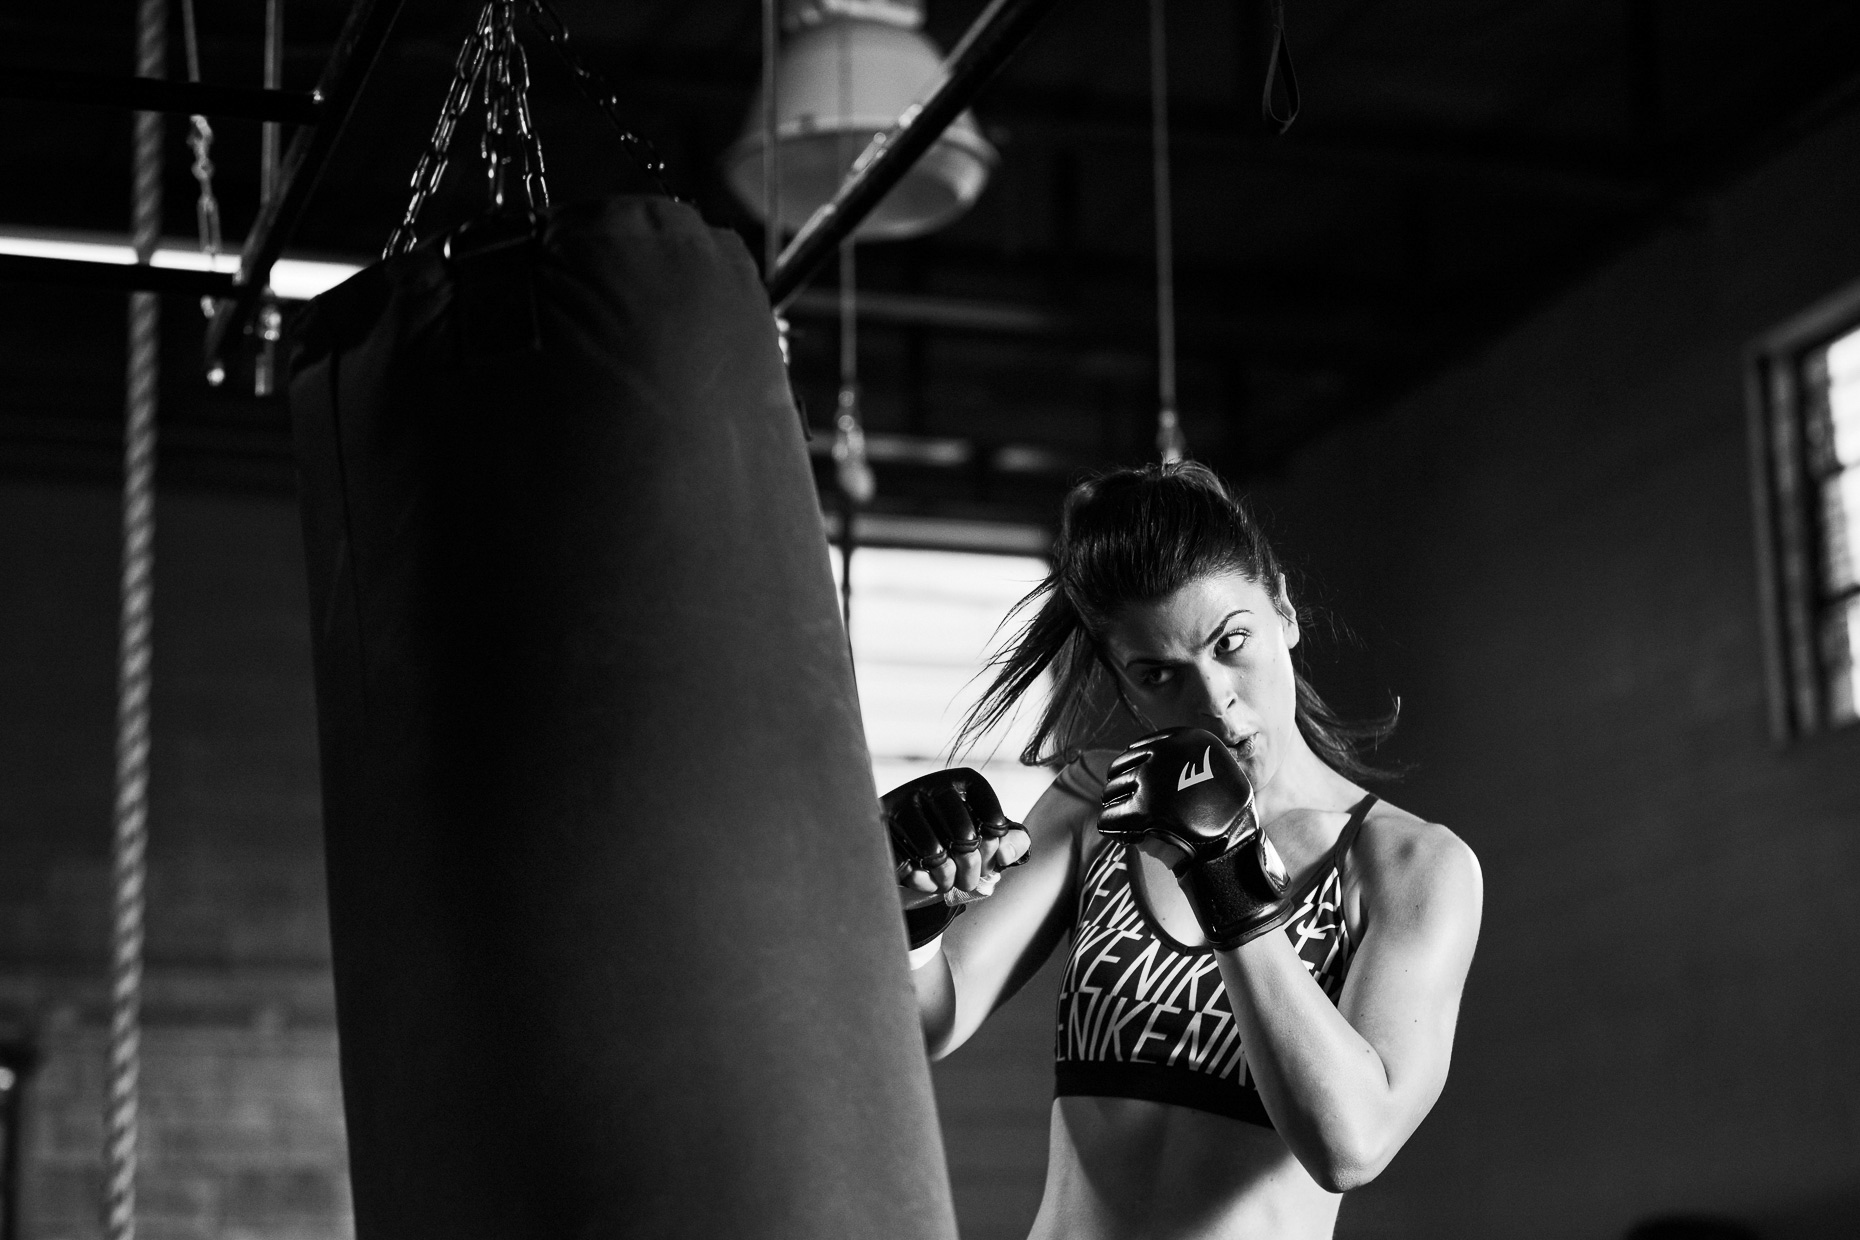 Crossfit boxing Hibbett Sports with Victoria Petrosky as she punches a heavy bag while training in a gym in Birmingham Alabama by Andy Batt